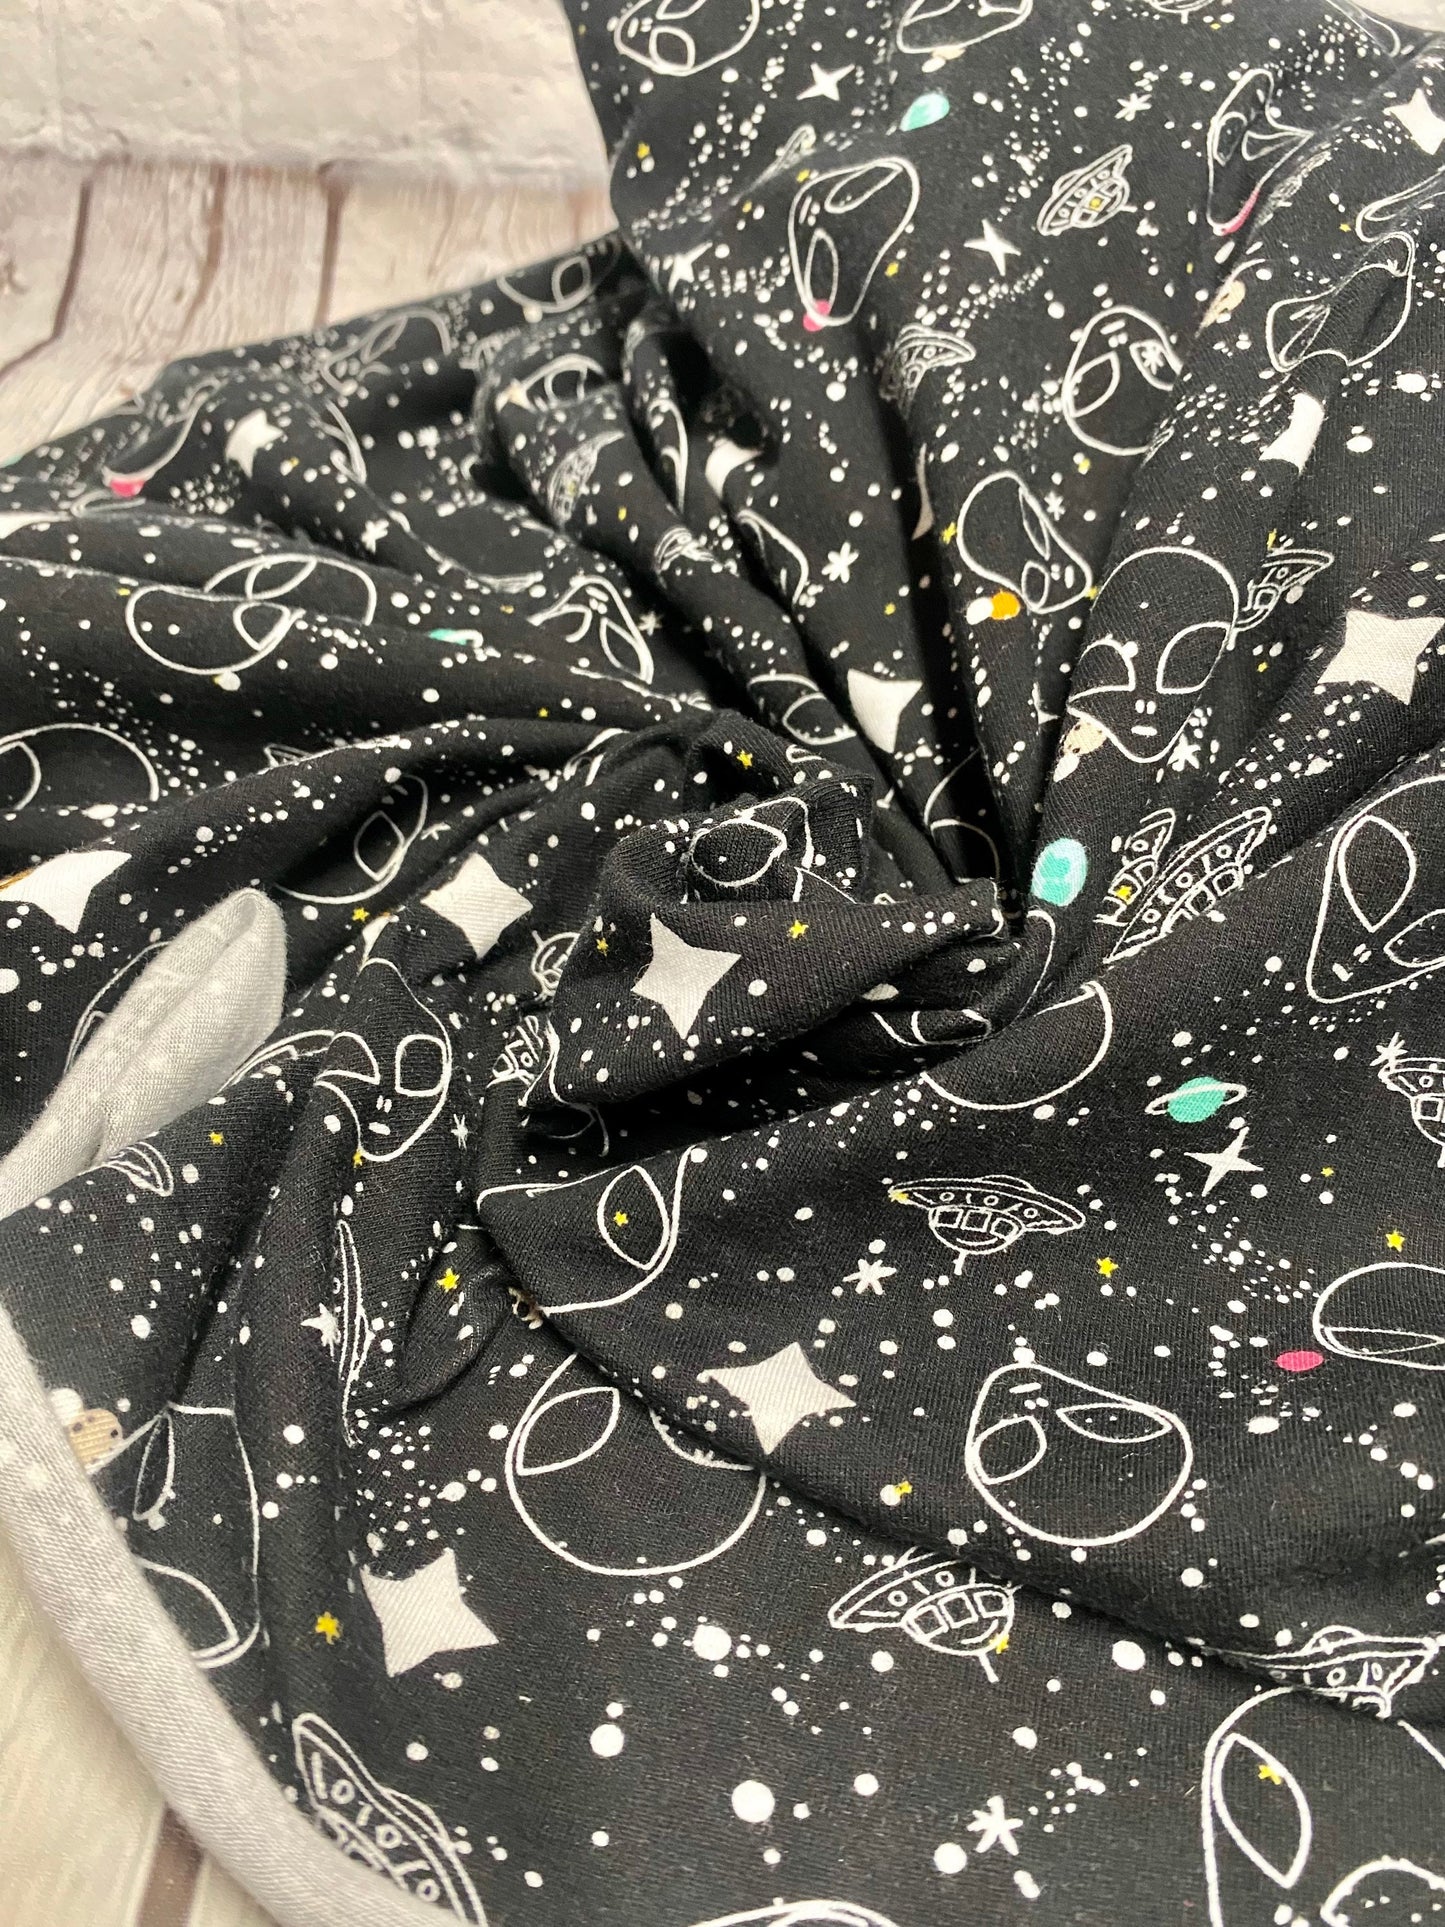 Heavy Weight Cotton Spandex Alien Space Print fabric By The Yard 240 GSM